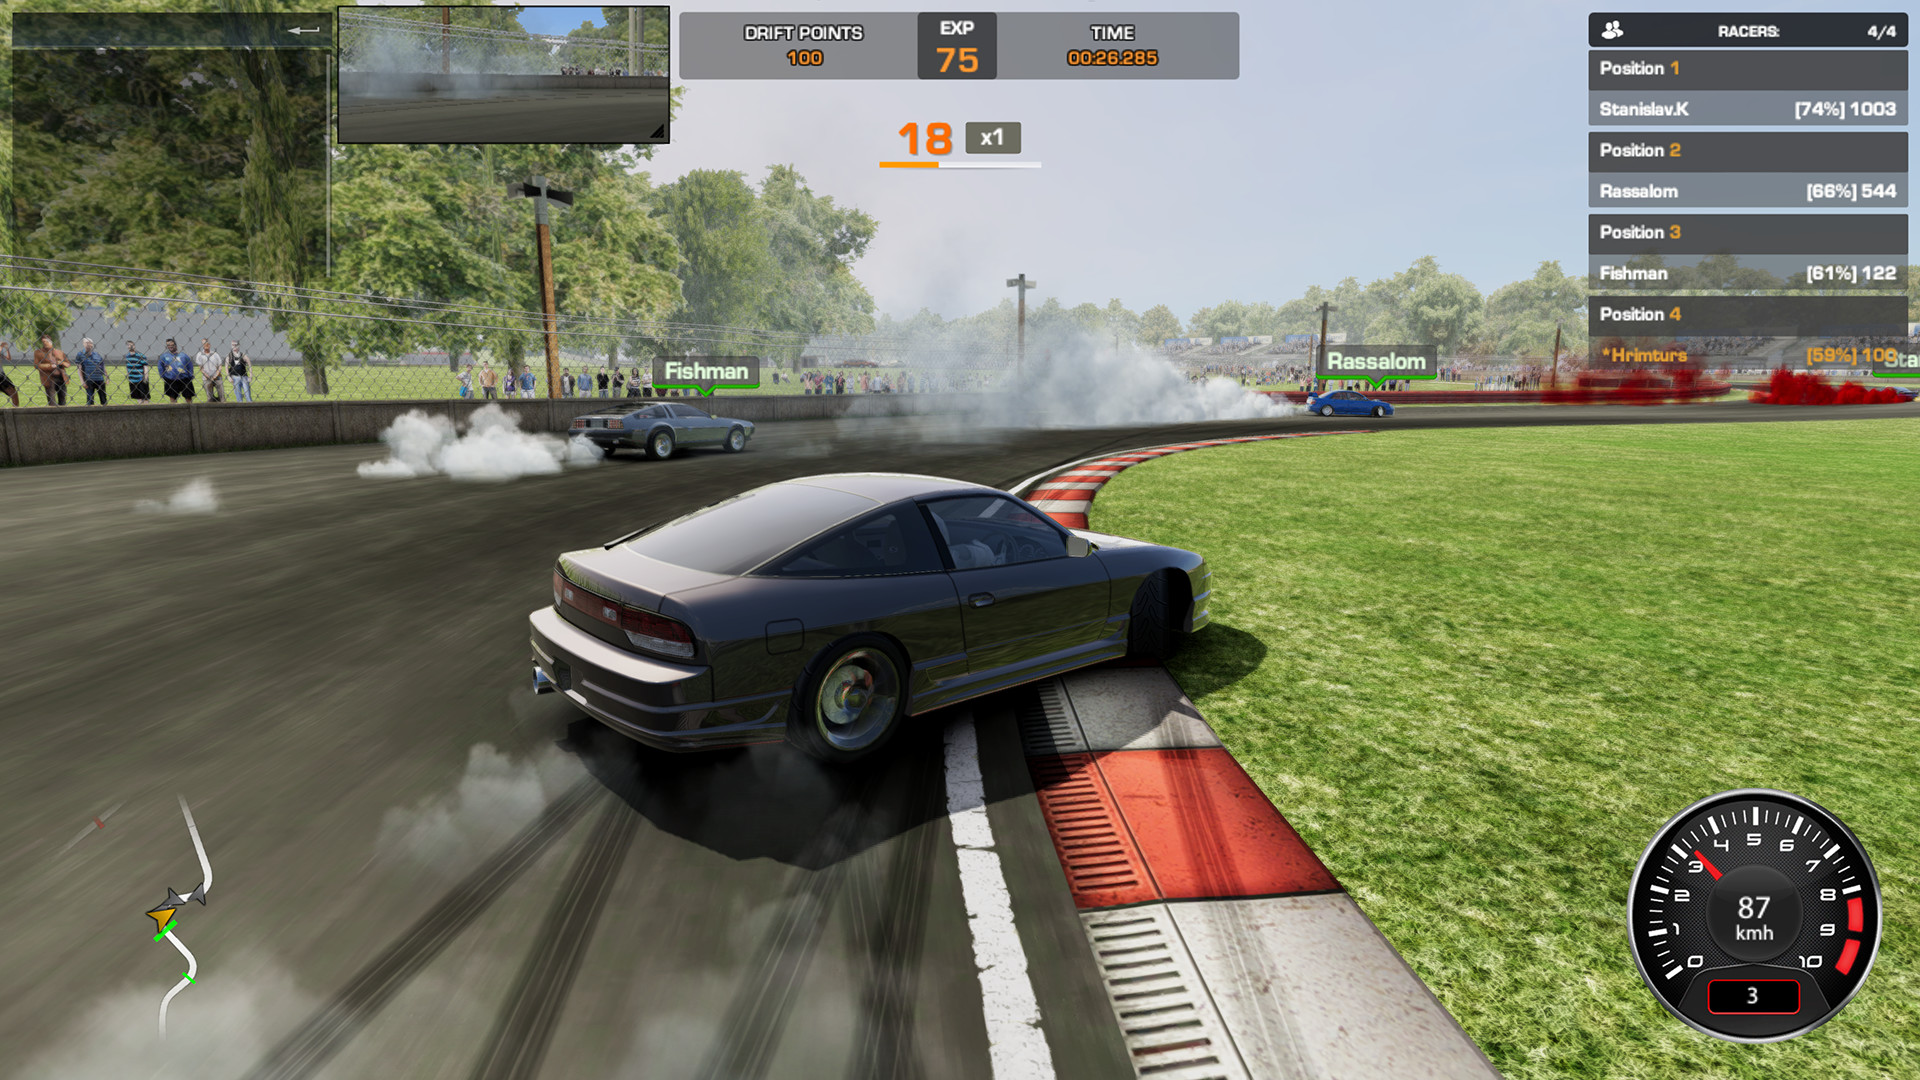 CarX Drift Racing Online Update 2.14.3 Adds New Cars - ORD